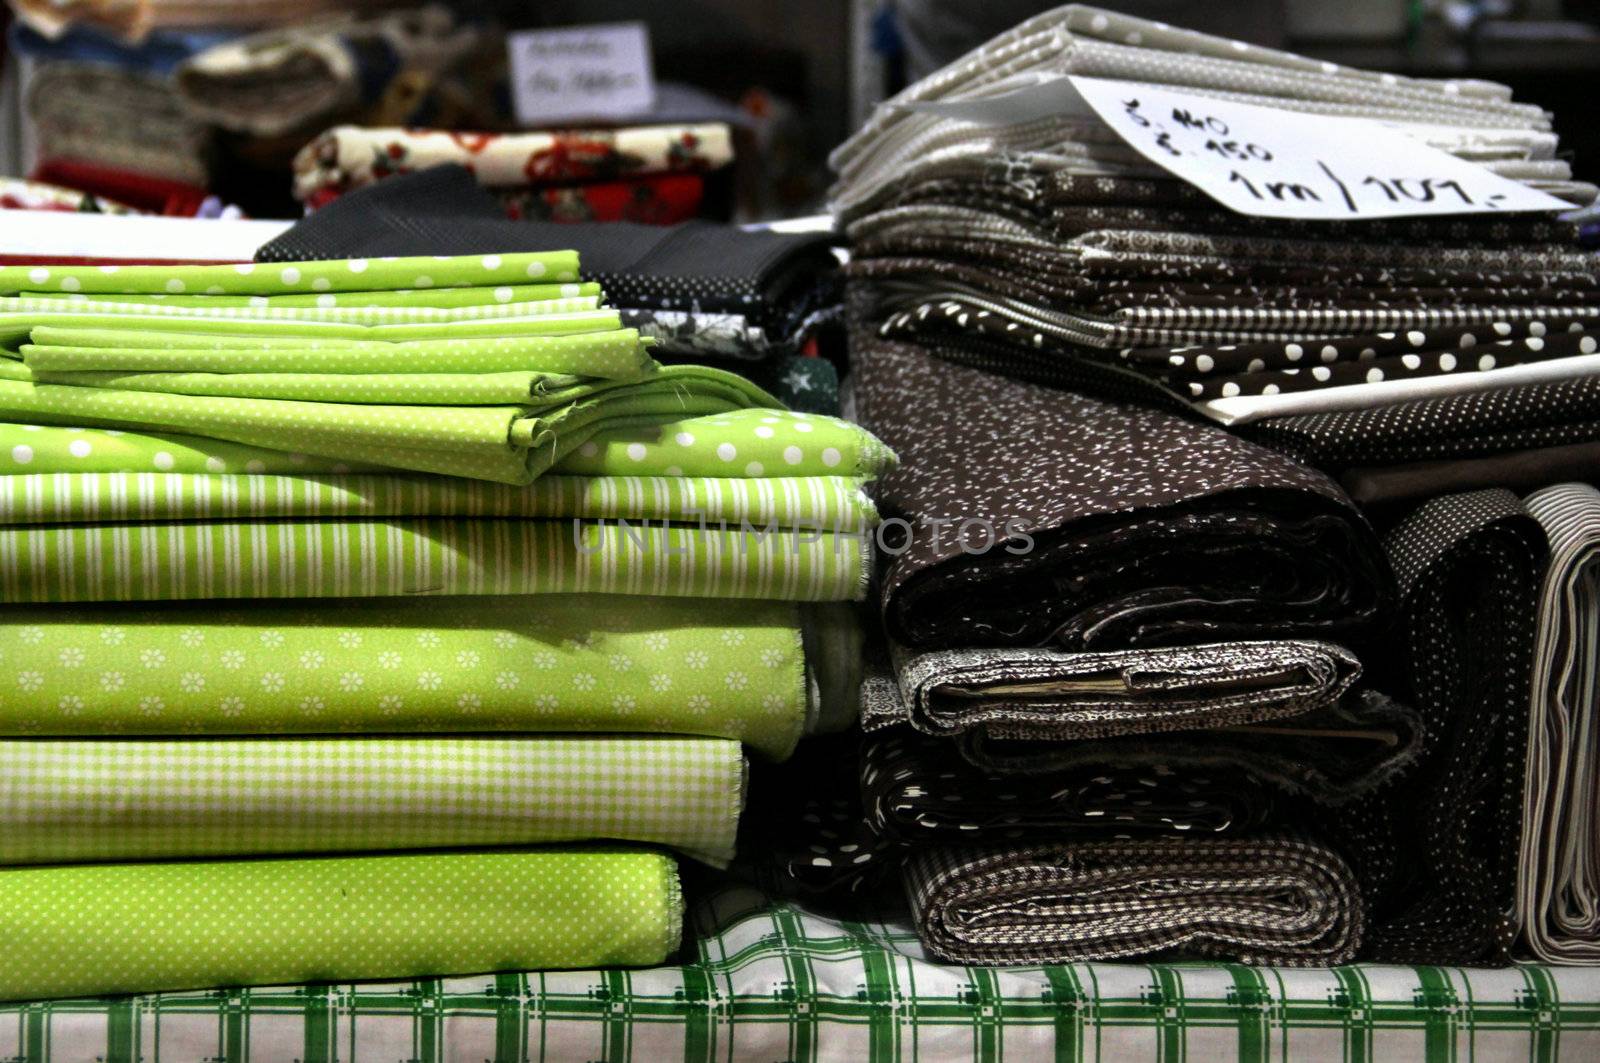 Big assortment of fabrics in the textile store 